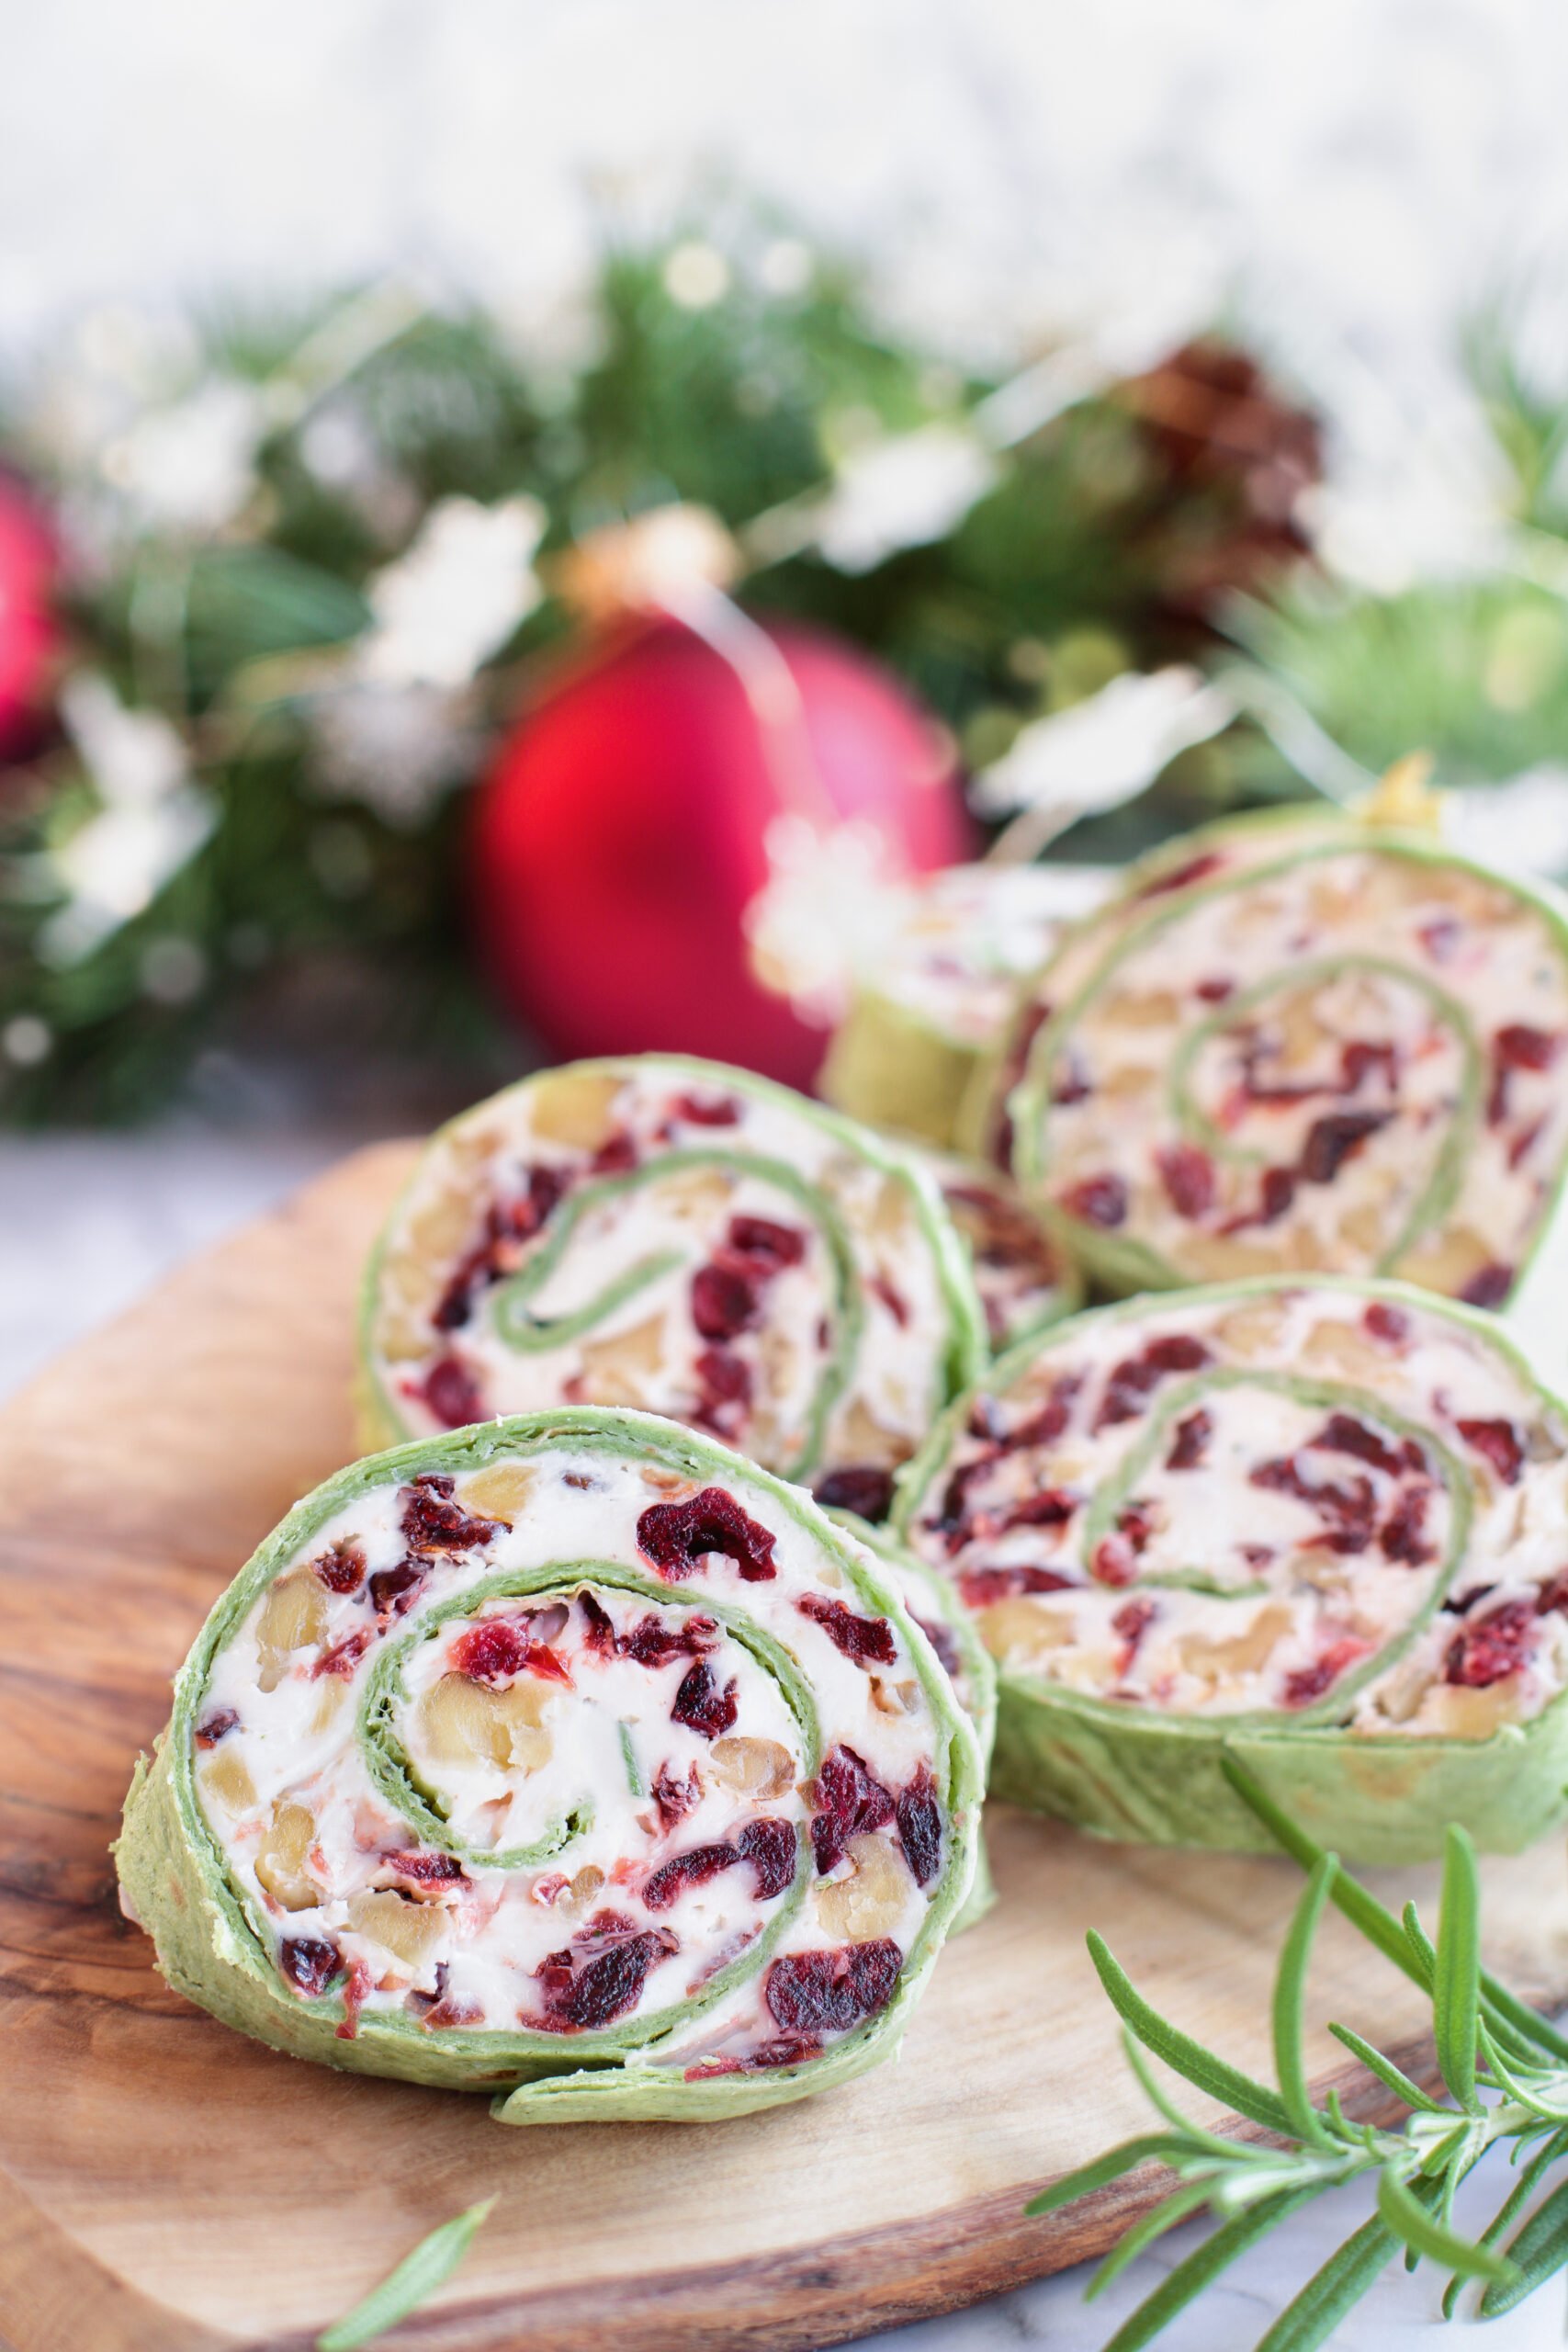 These Cranberry Walnut Pinwheels are the perfect make ahead Christmas appetizer or snack. Sweet filling with dried cranberries, with the crunch of walnuts all mixed in a creamy filling!